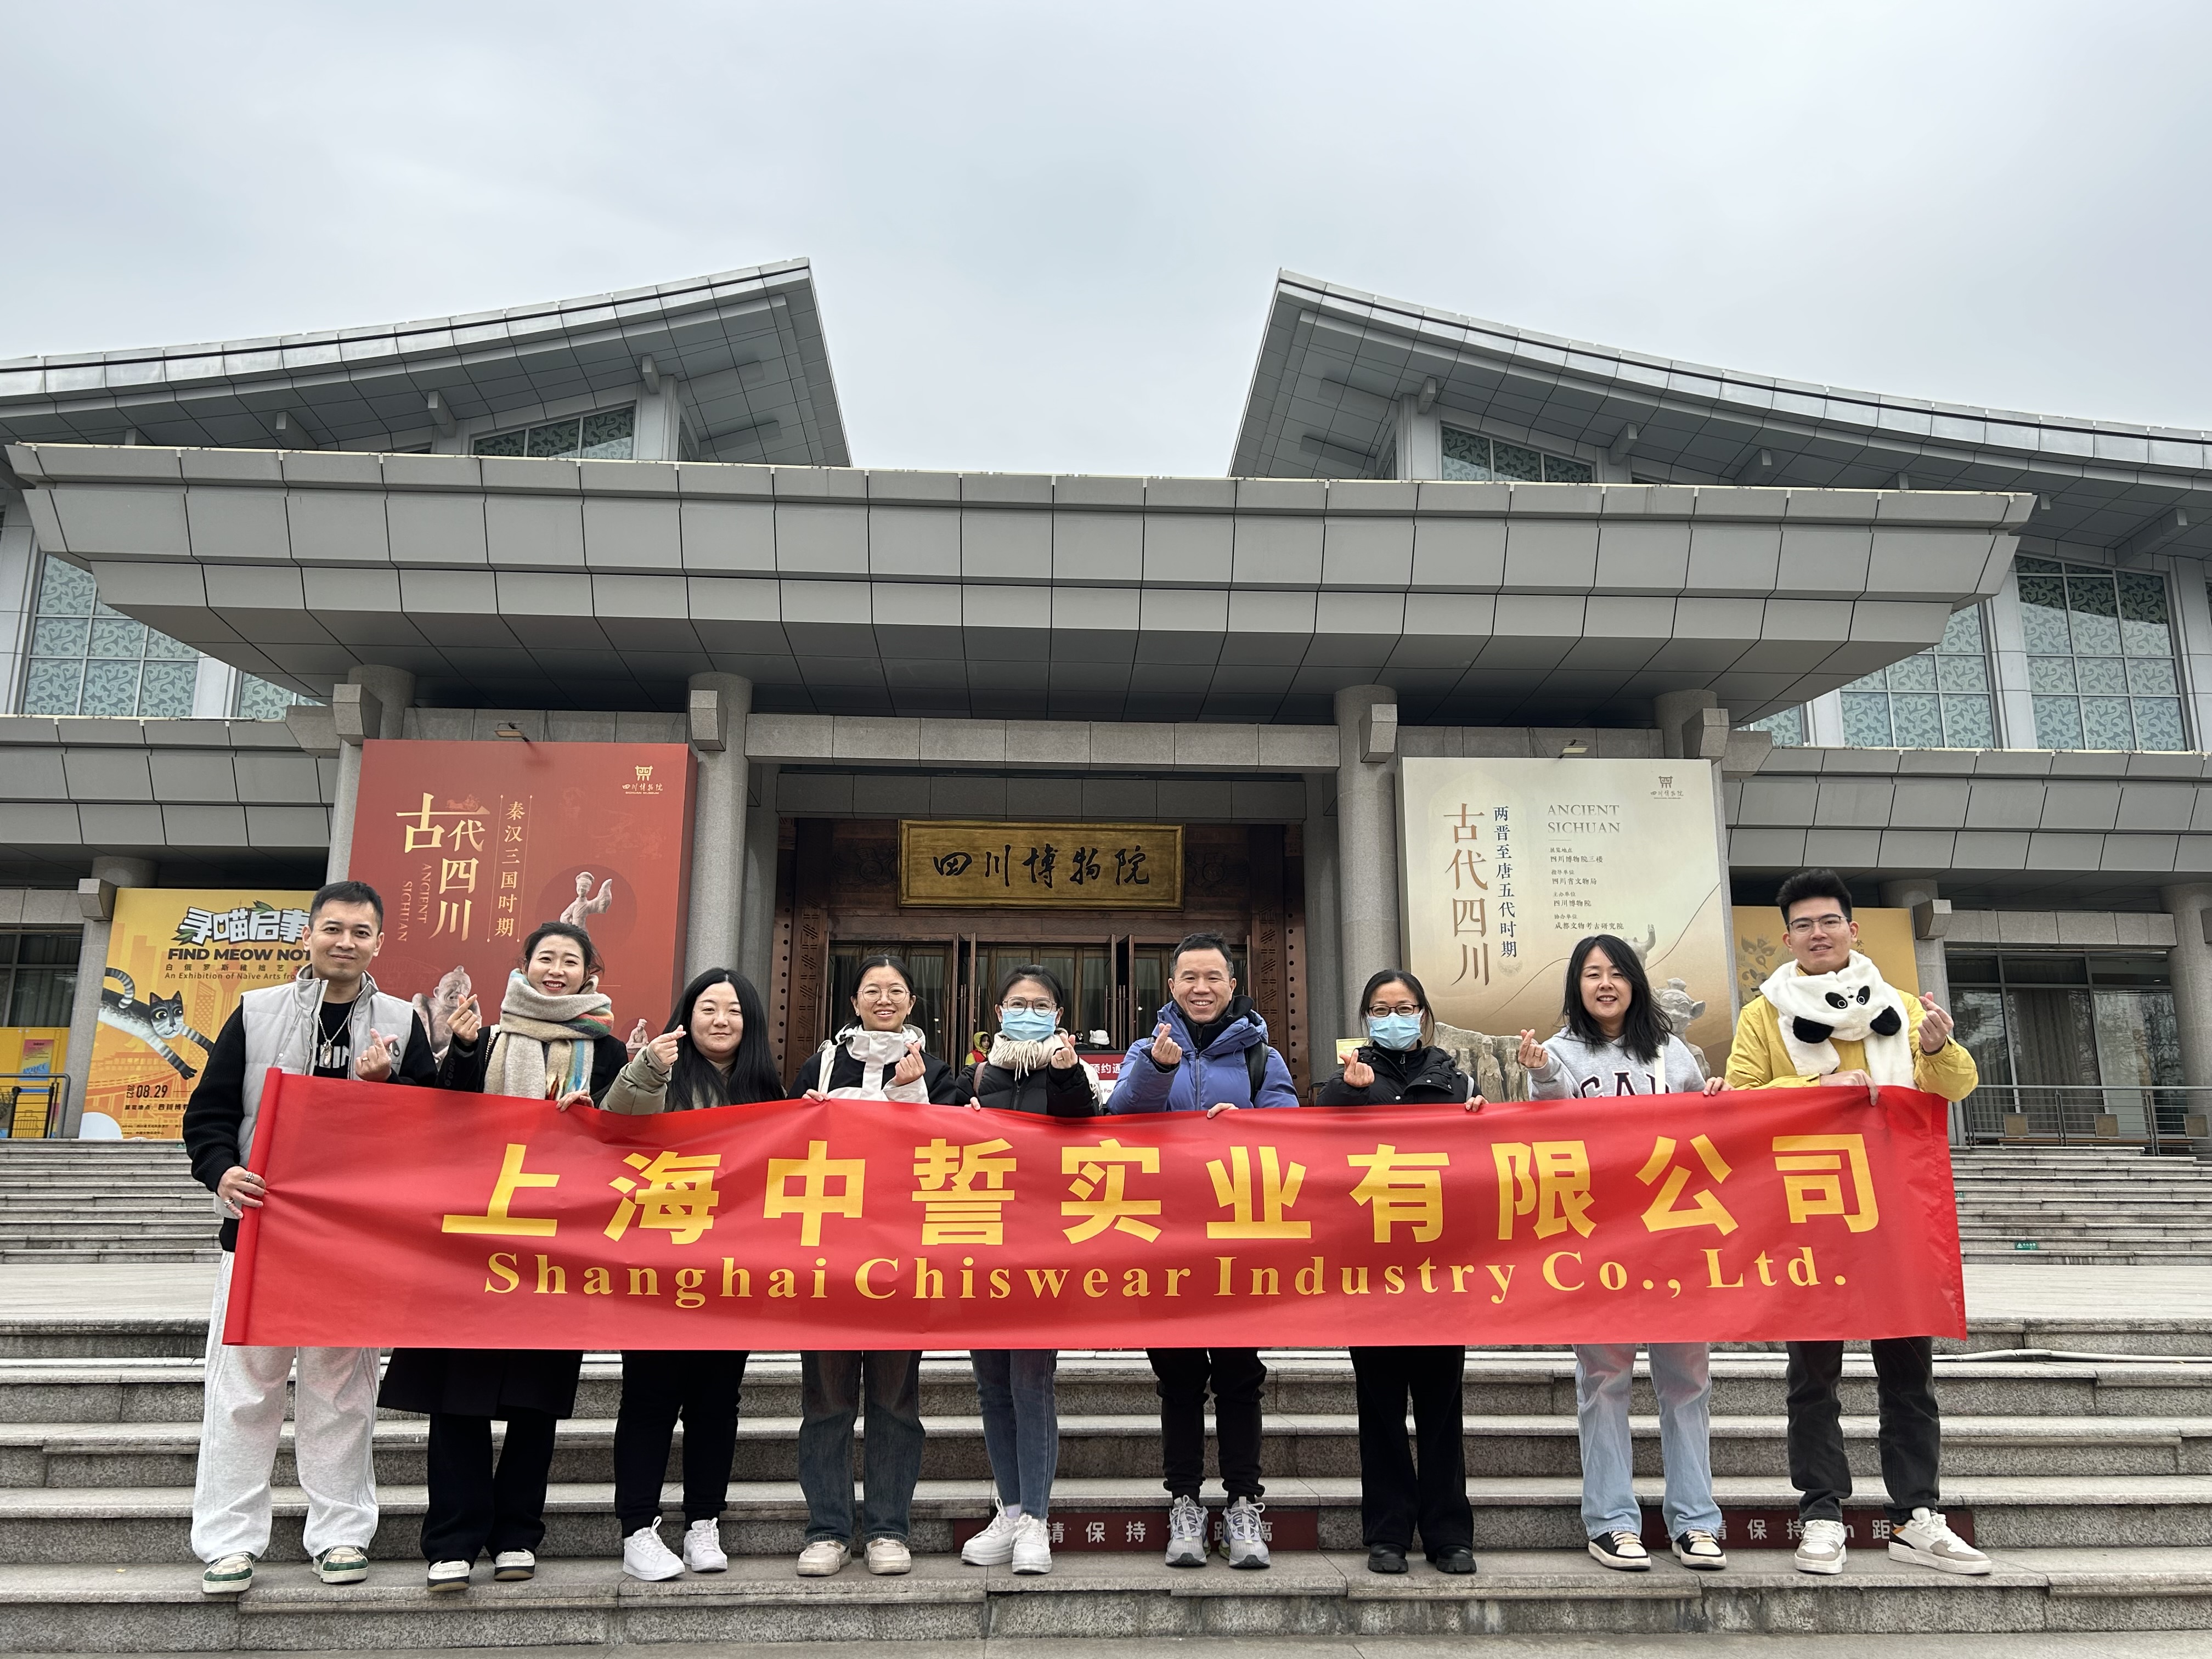 Shanghai Chiswear Chengdu Teambuilding Trip Successfully Concluded